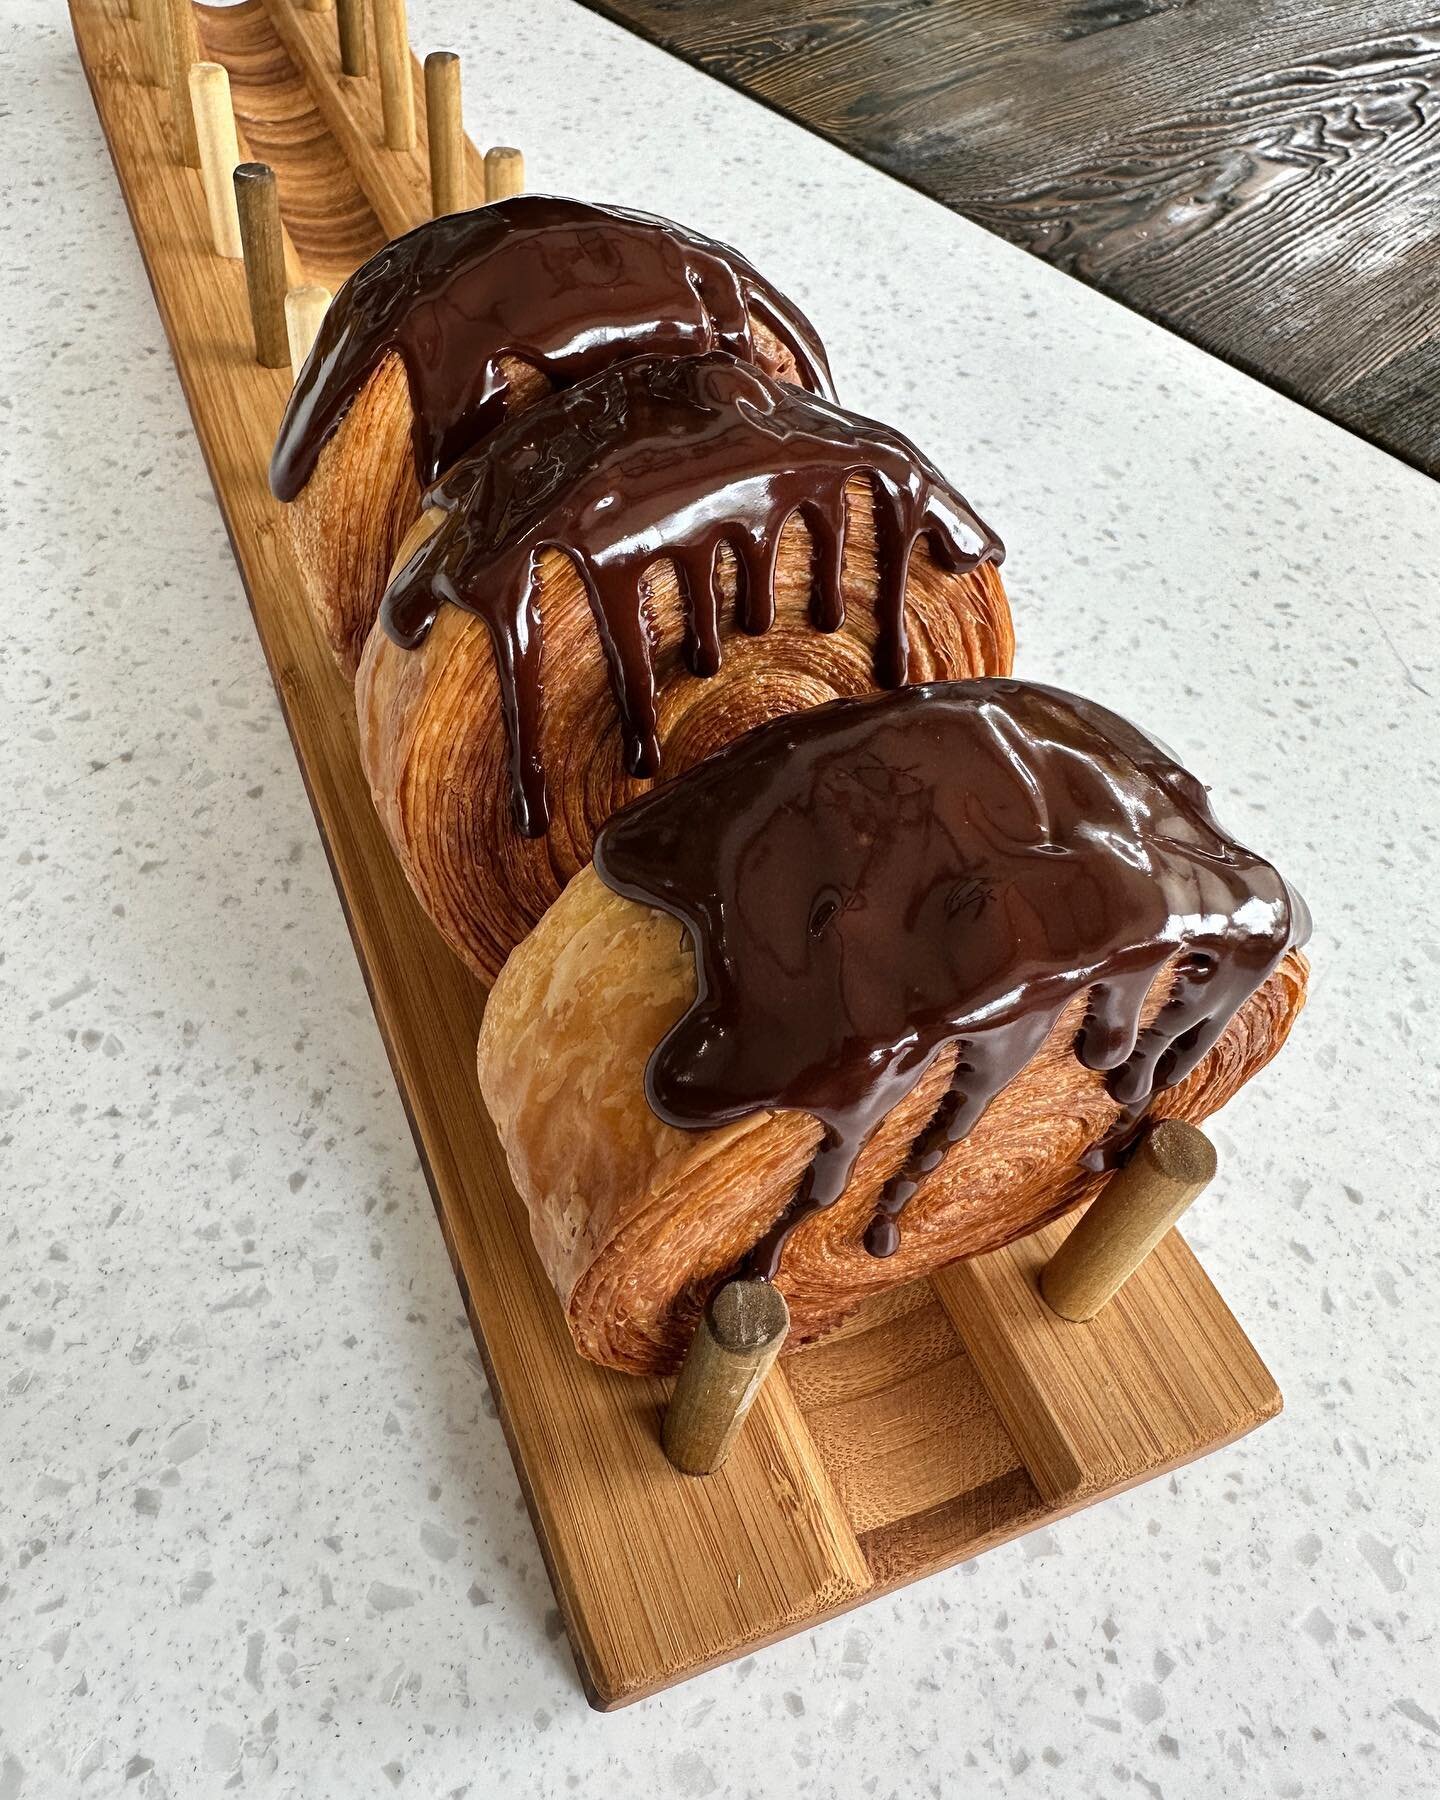 These scrumptious lovelies have been going viral on TikTok. They first appeared at Lafayette Bakery in NYC. People line up to buy the &ldquo;Croissant Supreme&rdquo; made with different flavors each month. Big excitement when they appeared in Montrea